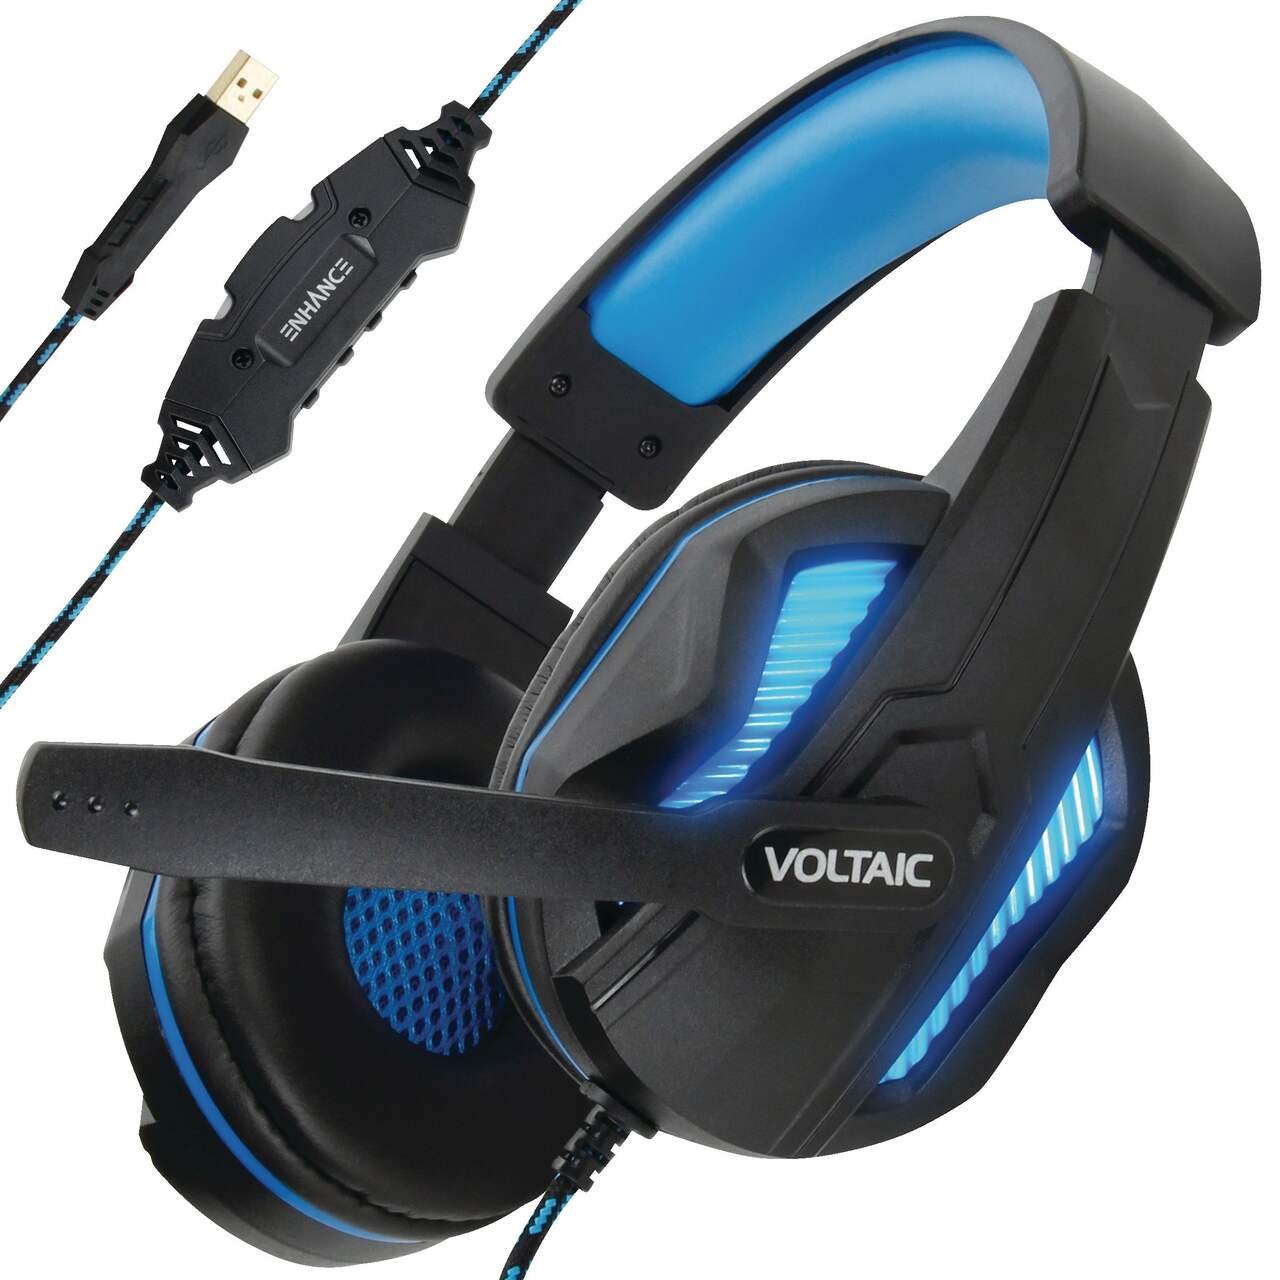 ENHANCE Voltaic PRO Gaming Headset for PC/PS4 with Adjustable Mic